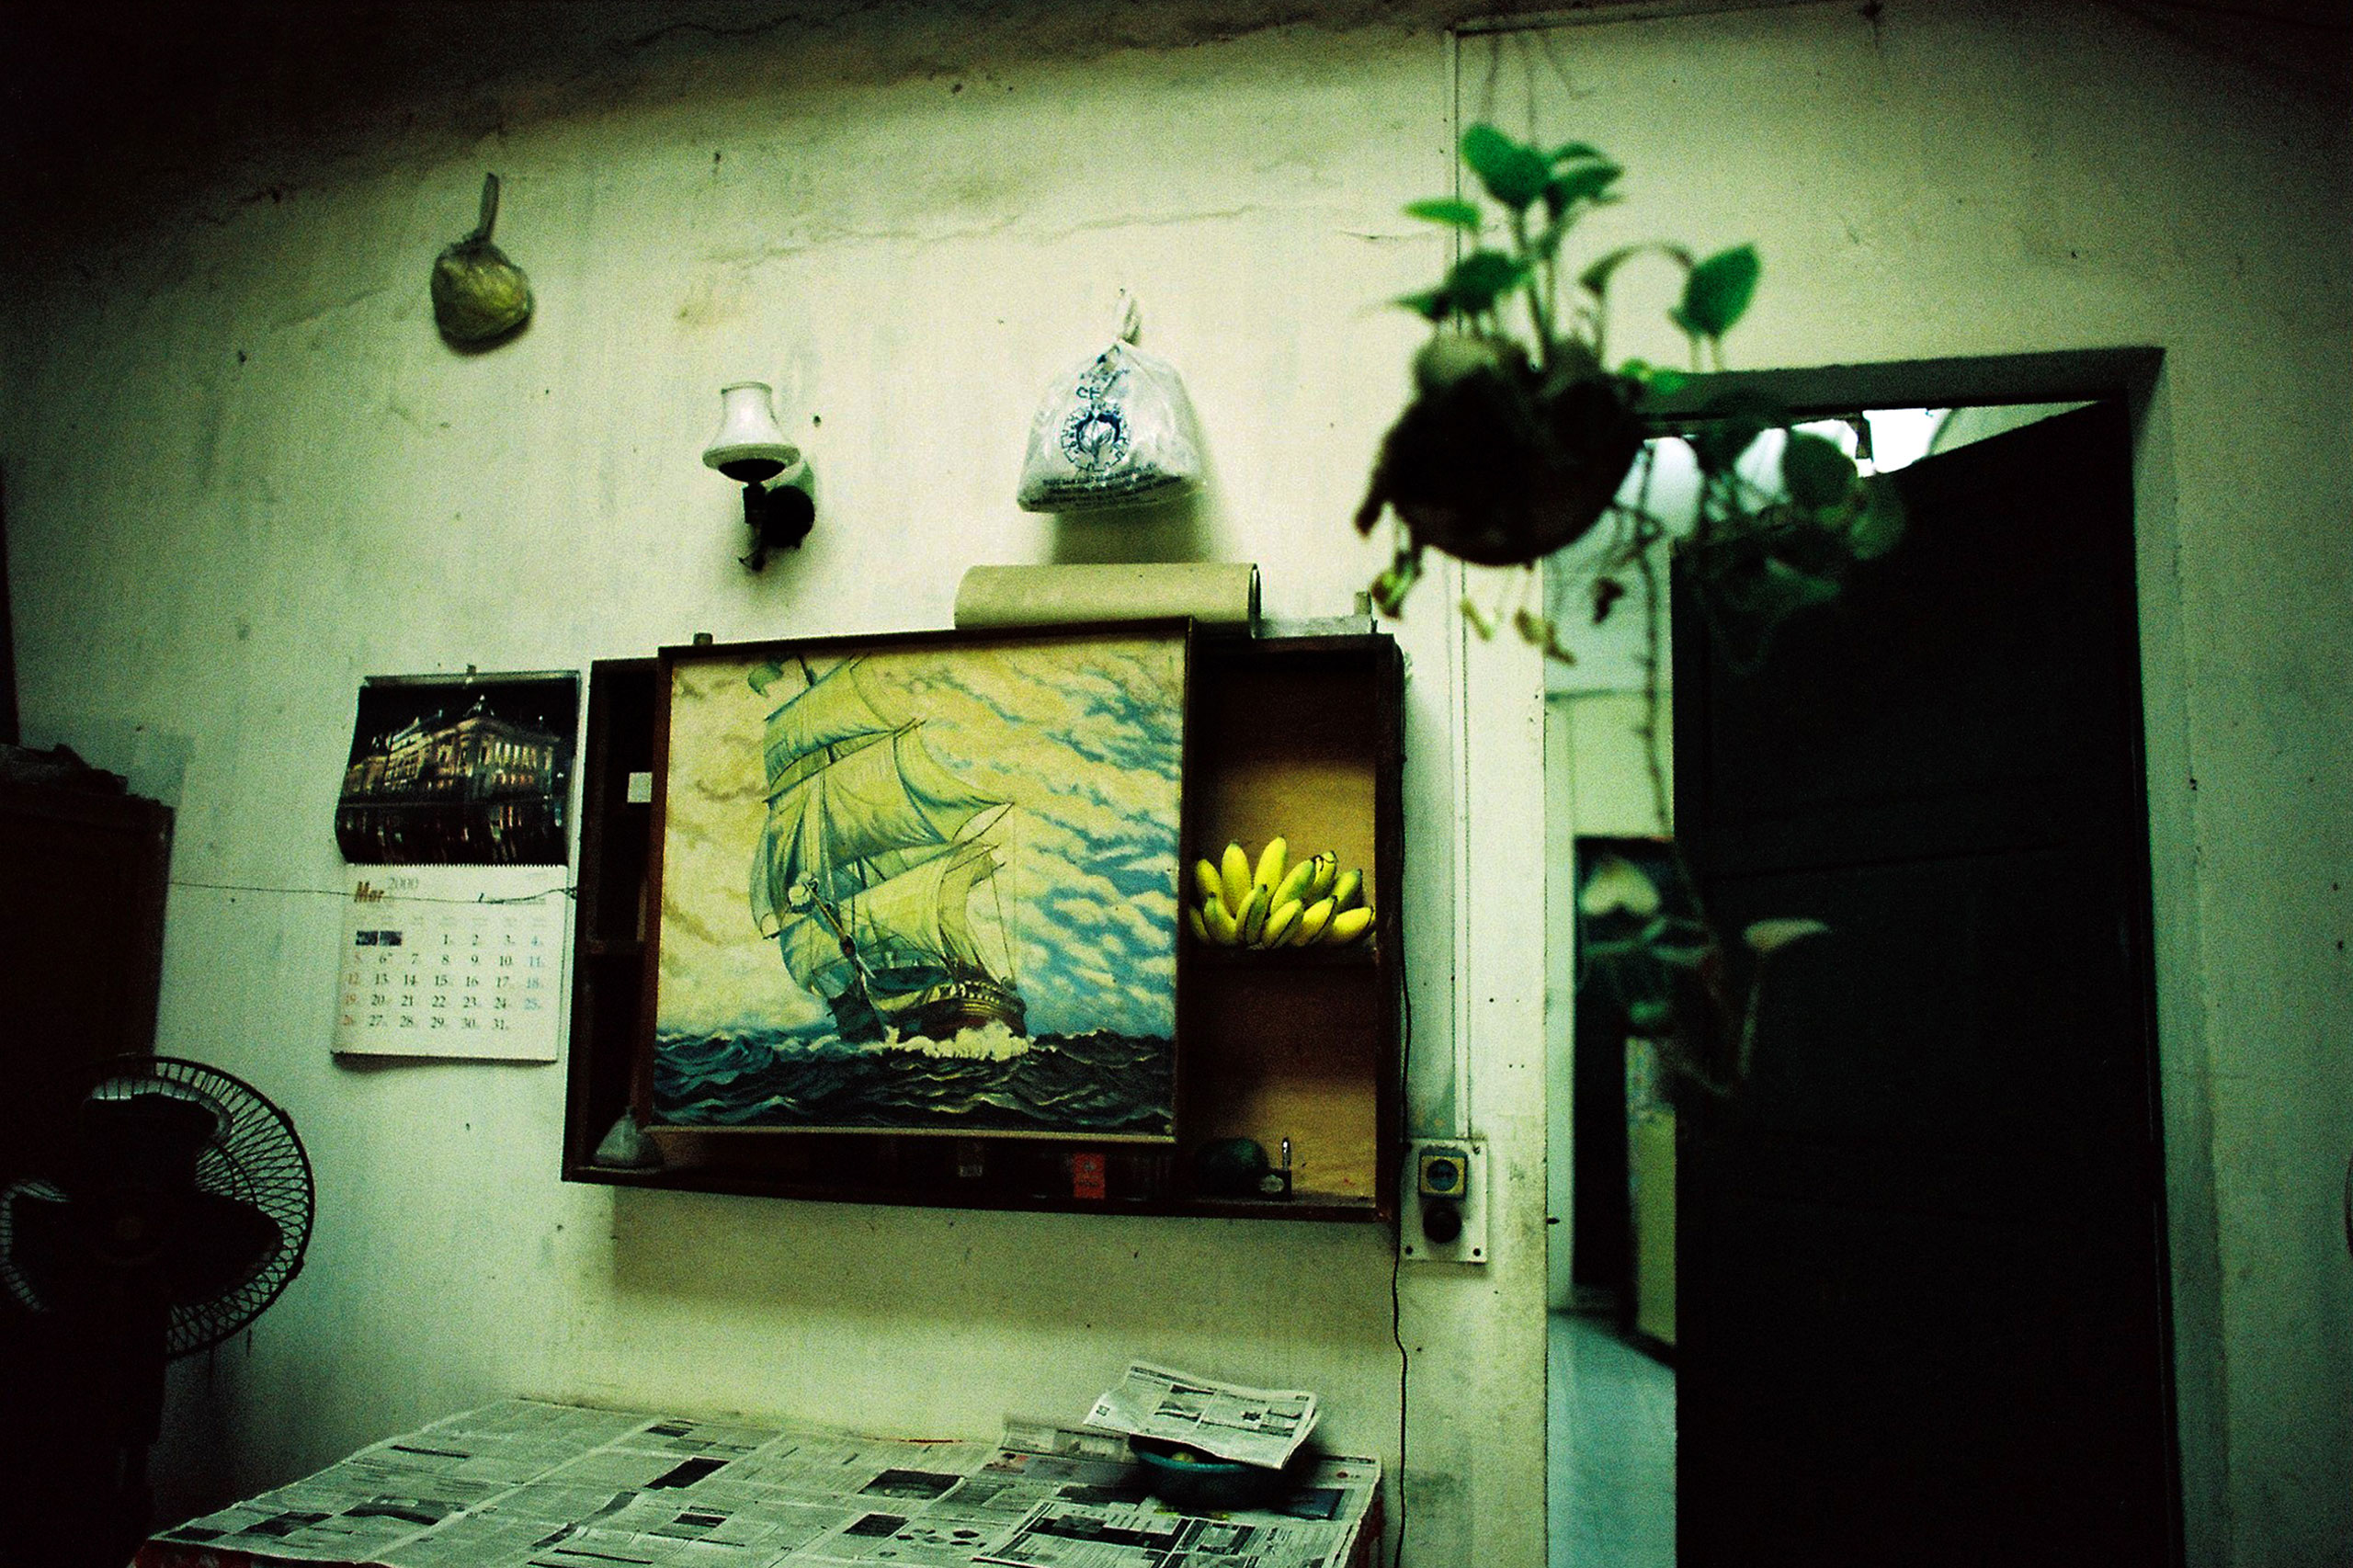 A wall decorated with paintings and potted plants in Hanoi, March 23, 2010.